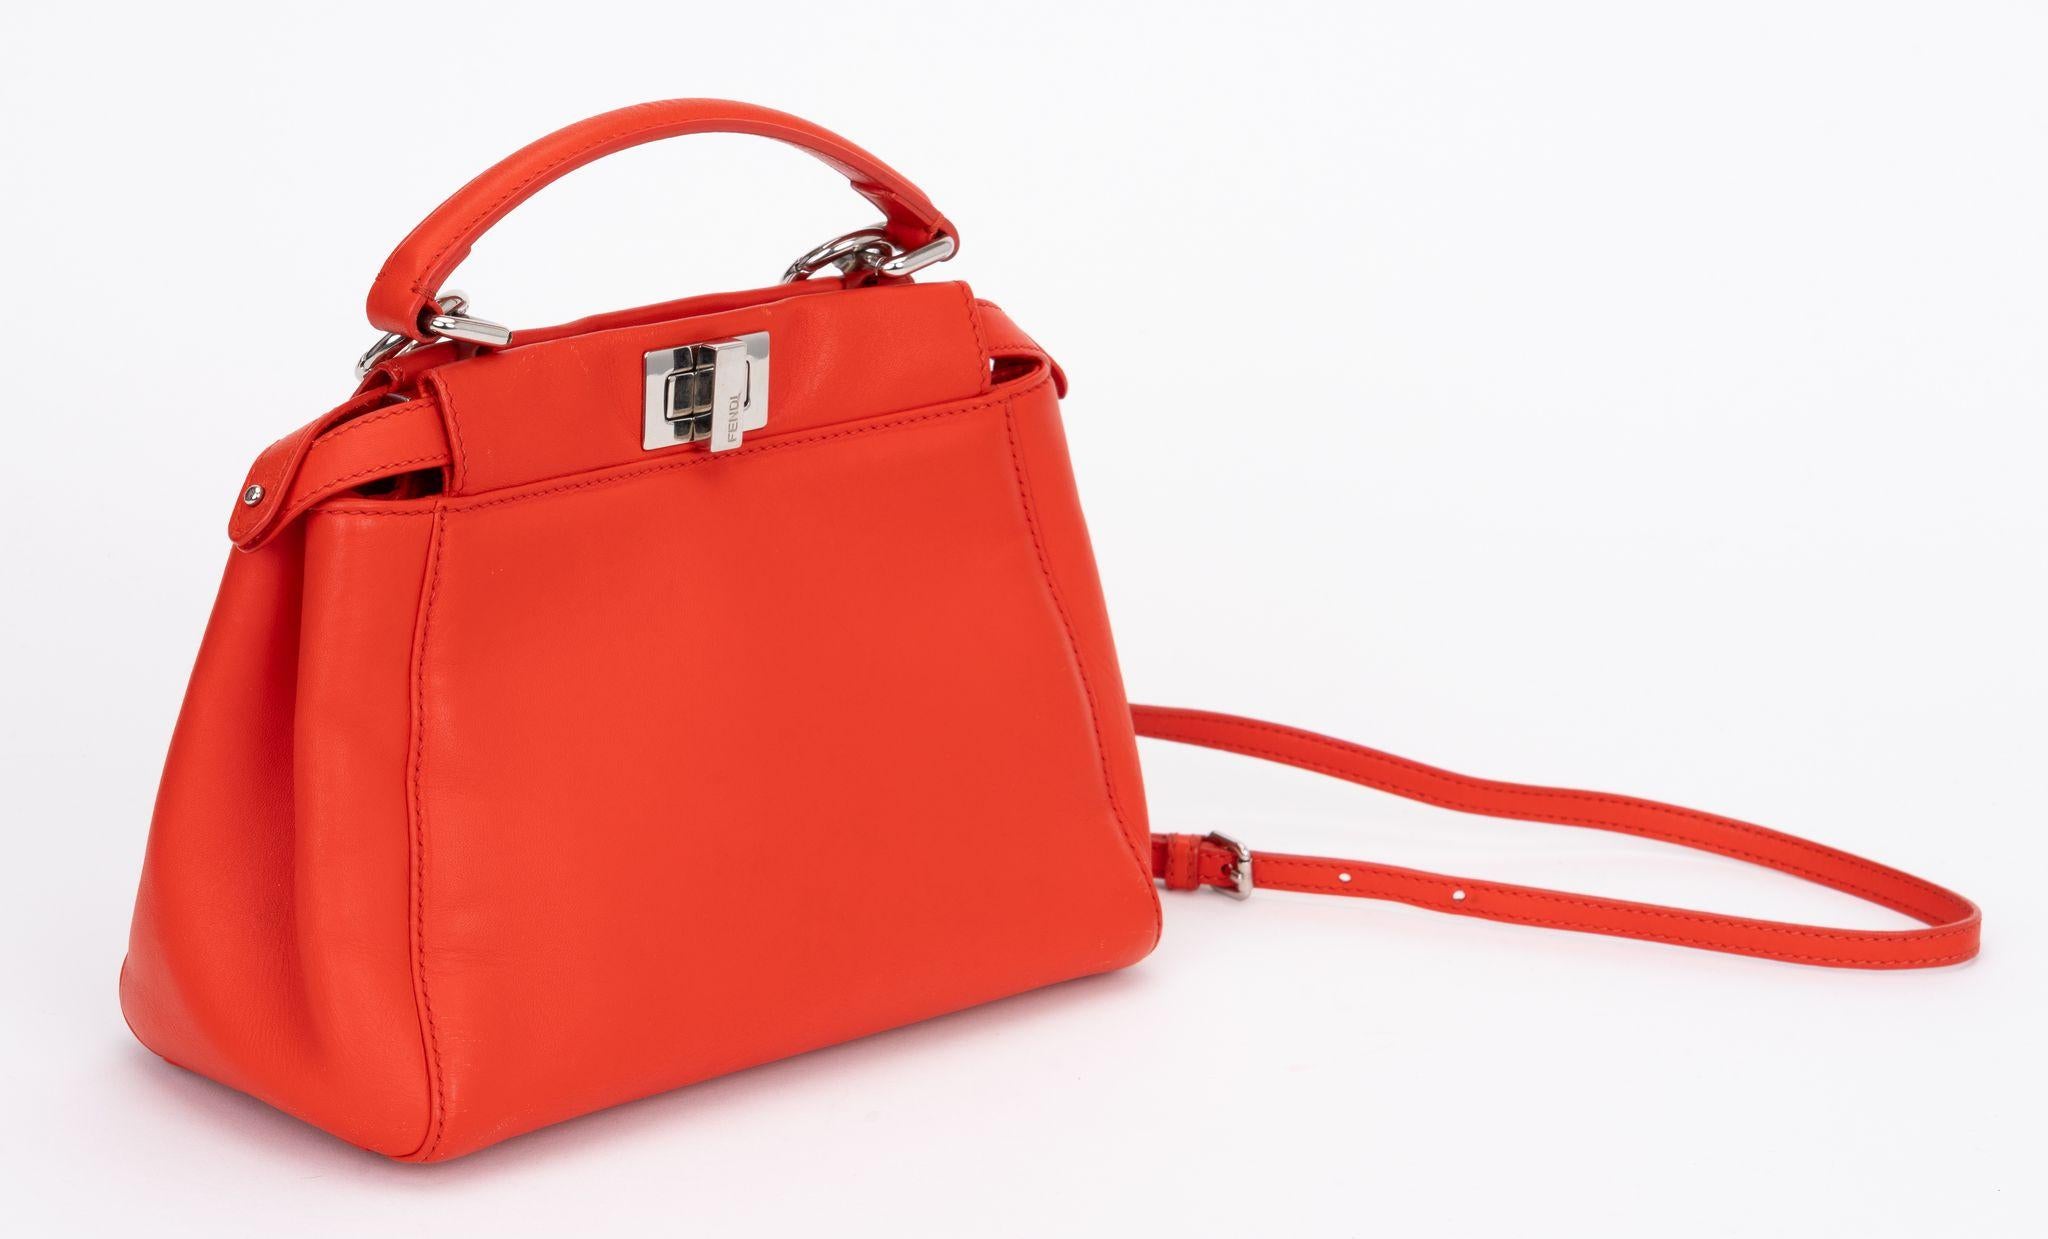 Fendi coral leather mini peekaboo cross body bag. Excellent condition, two open side pockets and one center closed compartment. 
Handle drop 4